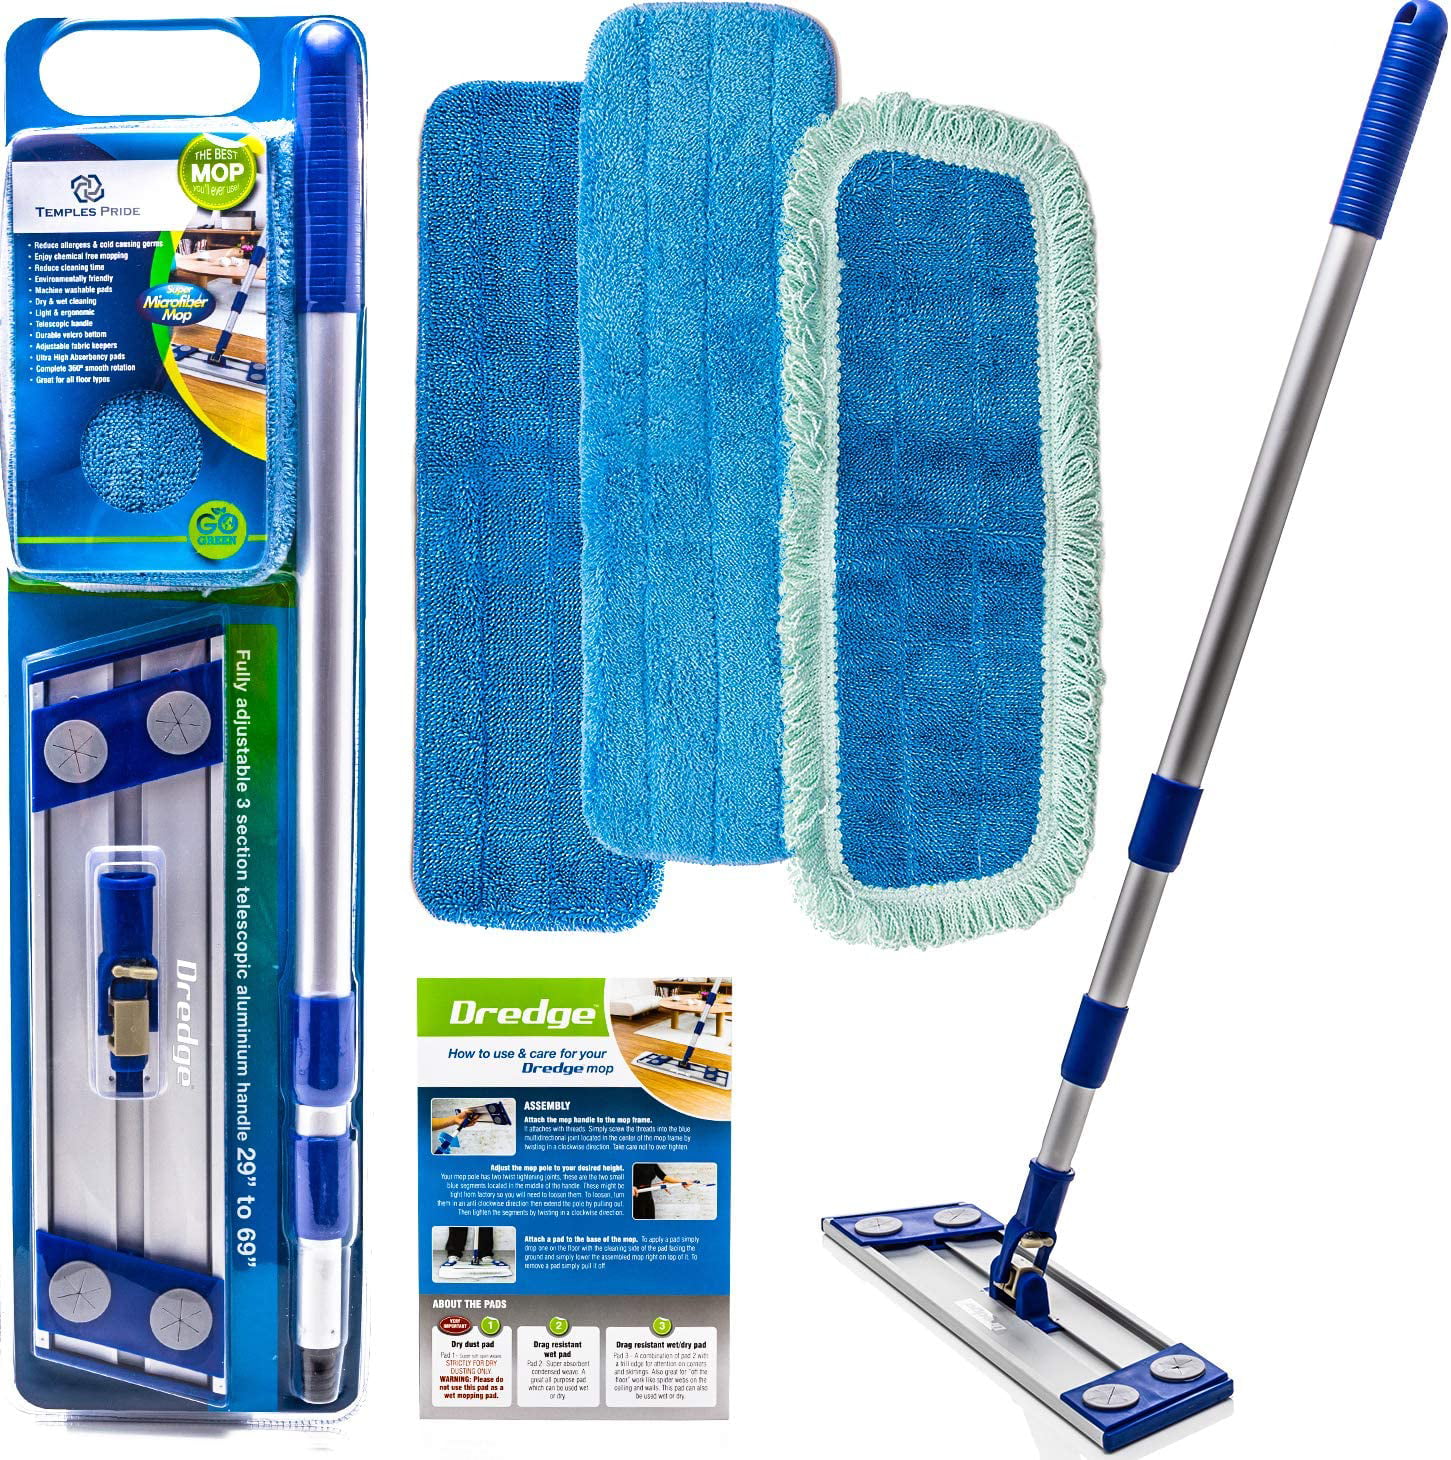 Professional Microfiber Mop For, Best Cleaning System For Laminate Floors